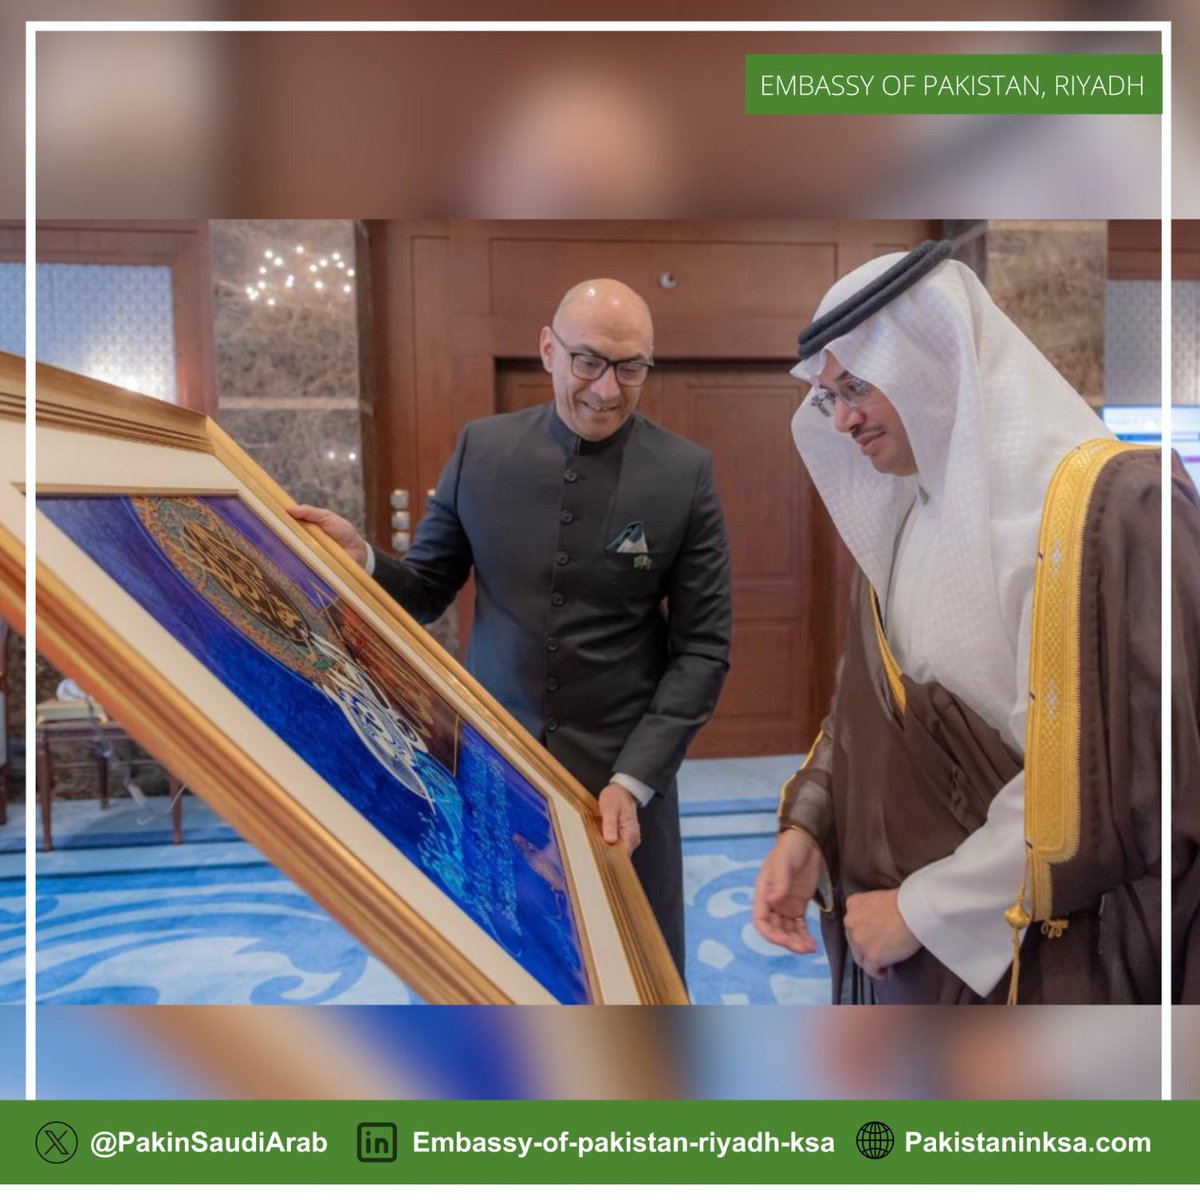 H.E @AmbFarooq met with H.R.H. Prince Saud bin Talal bin Badr Al-Saud, Governor of the historical Al-Ahsa. Welfare of Pakistanis & other matters of mutual interest discussed.